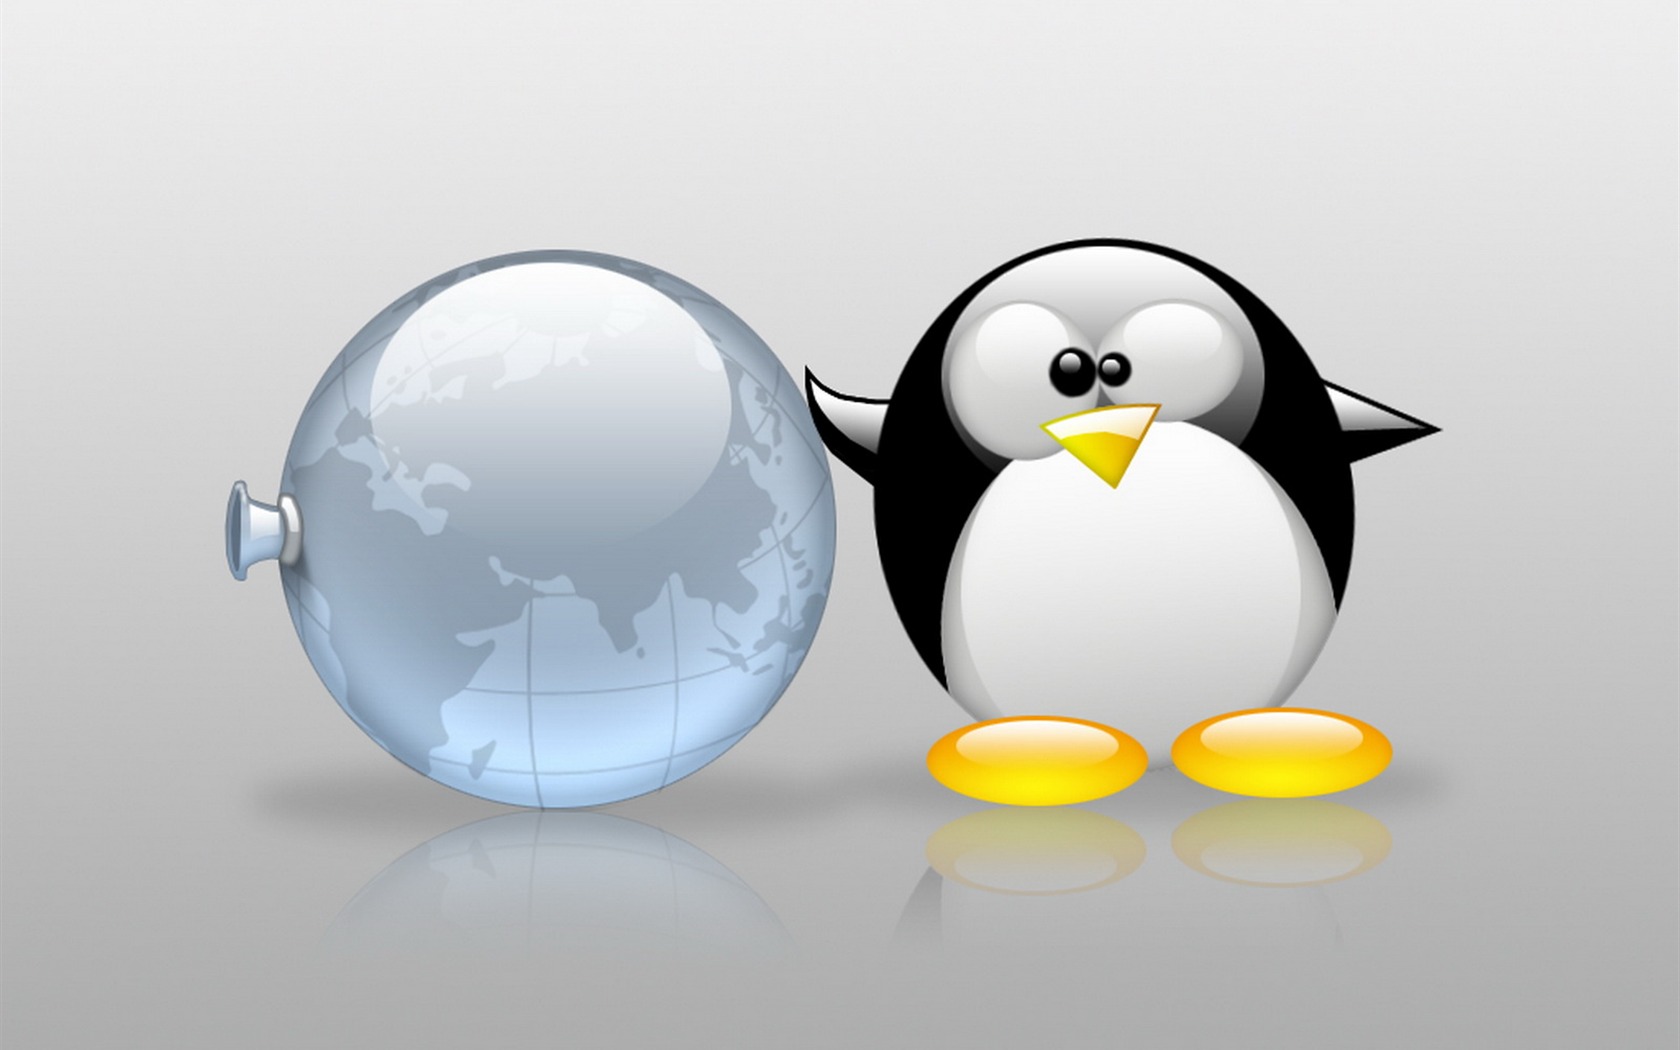 Linux tapety (2) #16 - 1680x1050